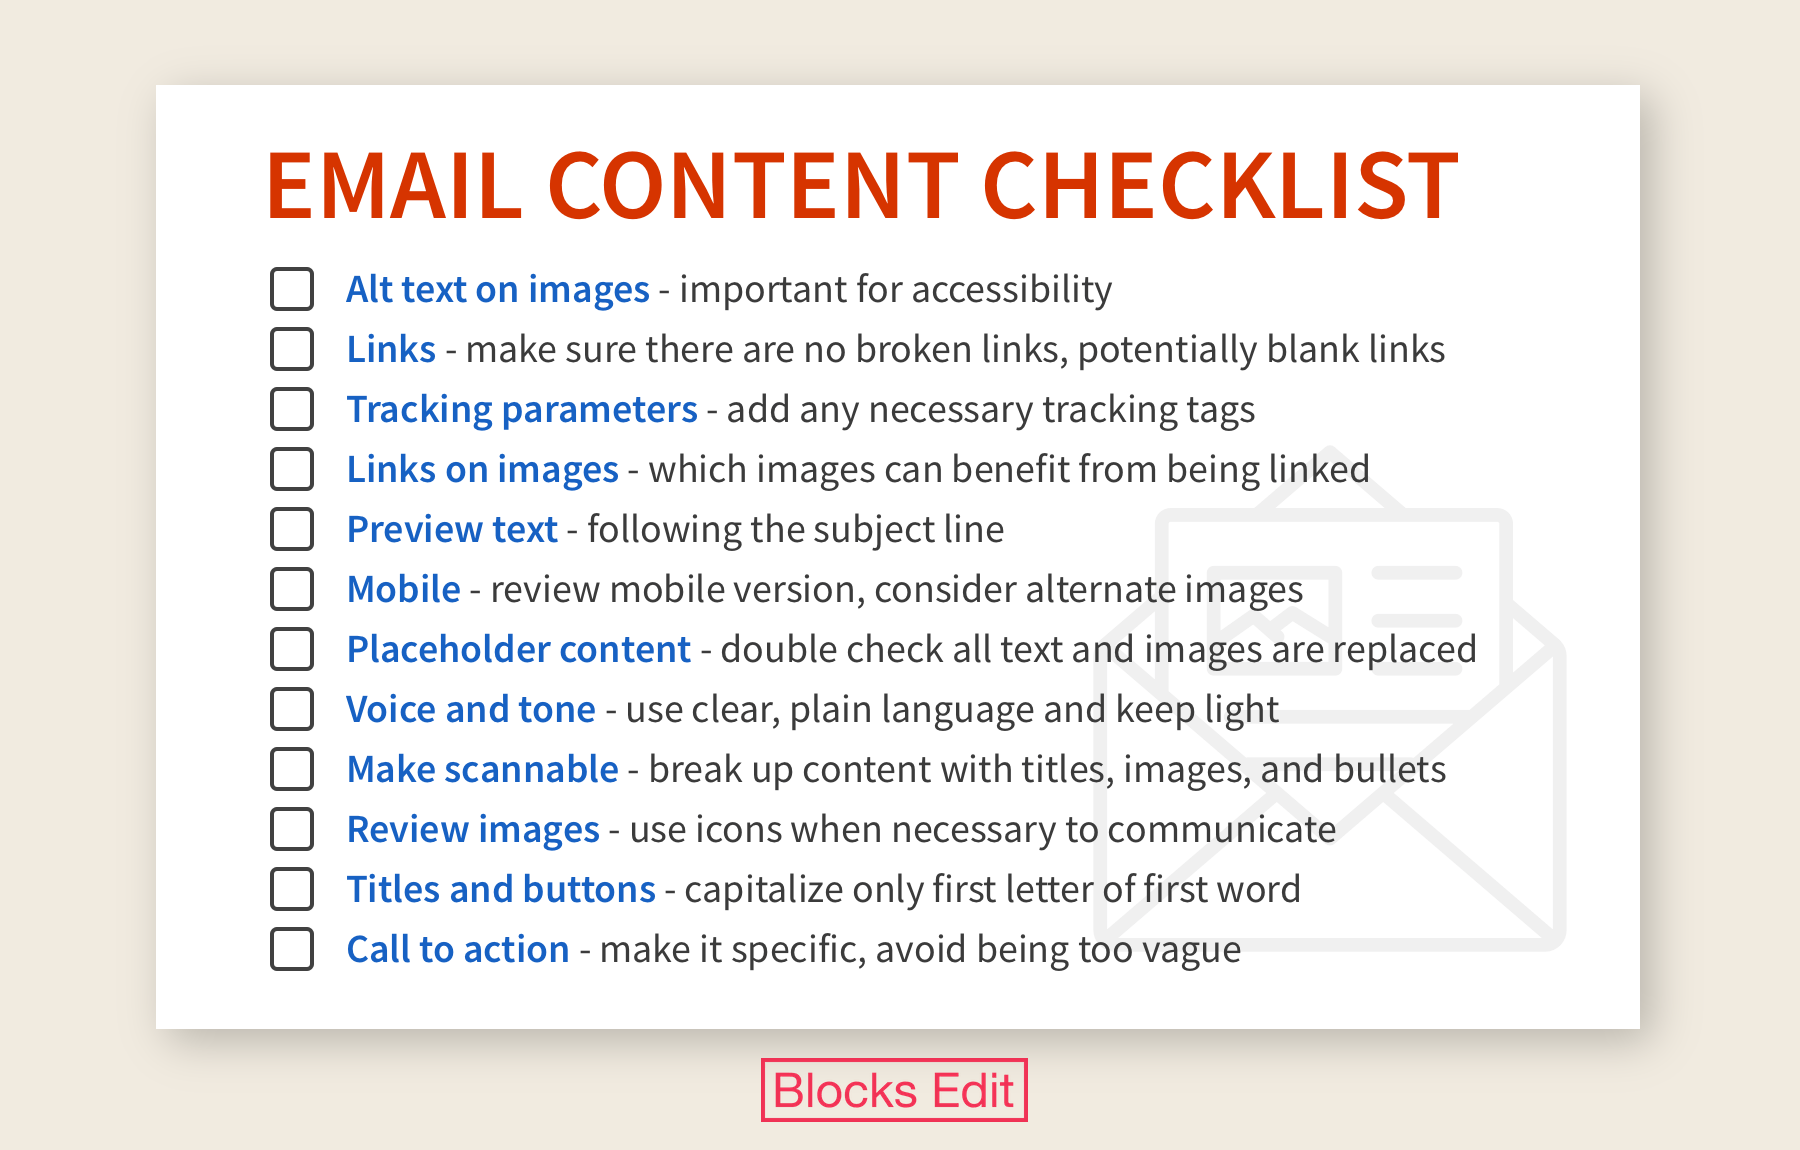 A list of 12 reminders to help with reviewing email content: Alt text on images, links, tracking parameters, links on images, preview text, mobile, placeholder content, voice and tone, make scannable, review images, titles and buttons, call to action.